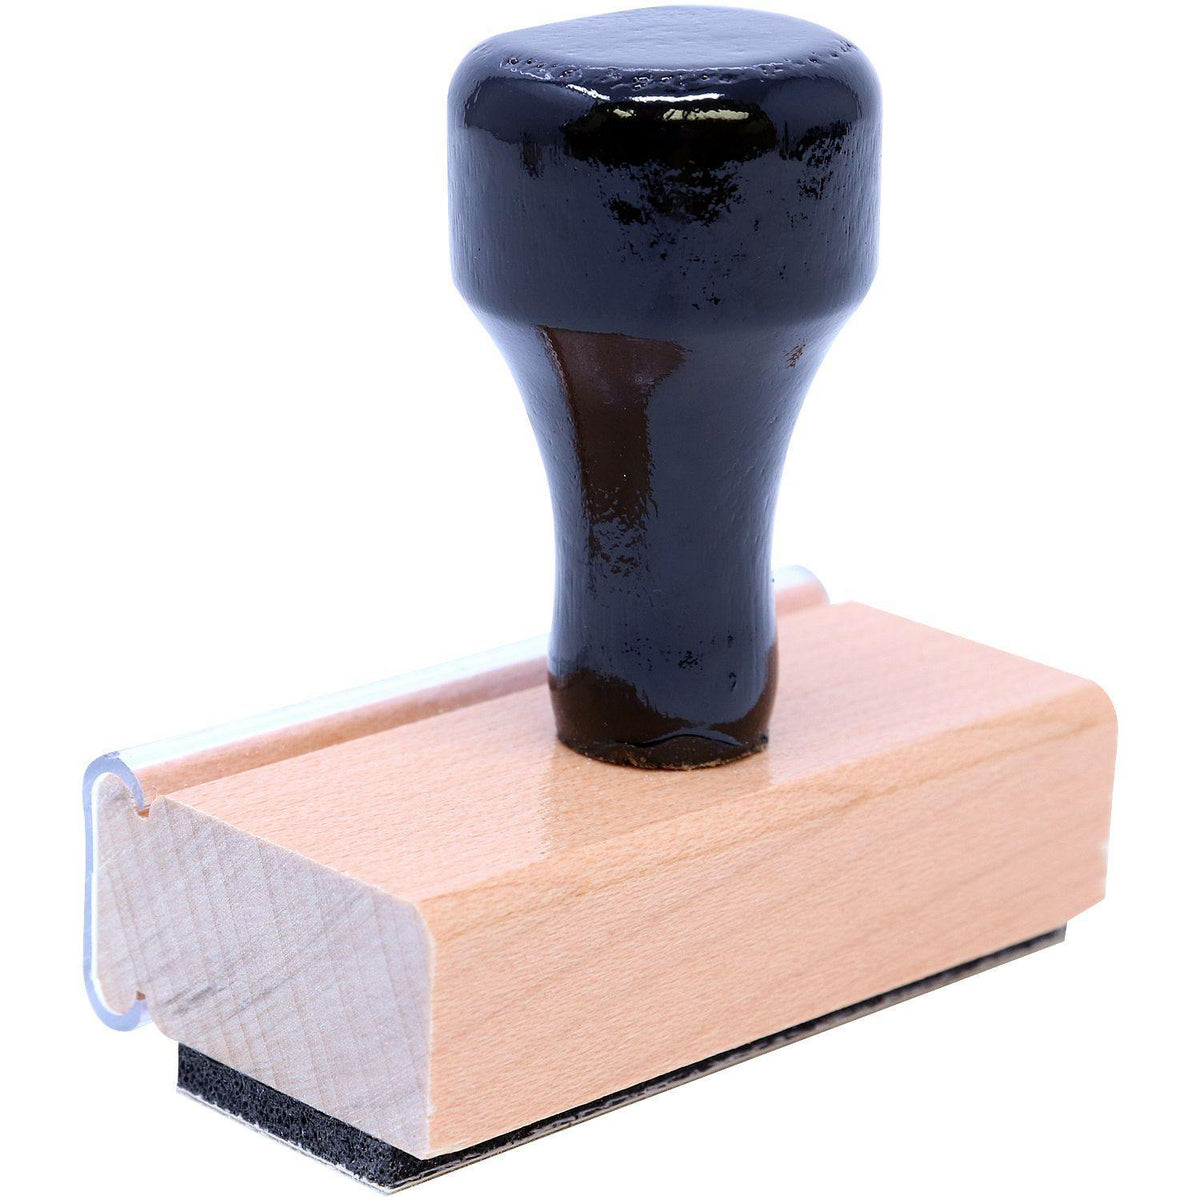 Covid-19 Rubber Stamp Back Angle